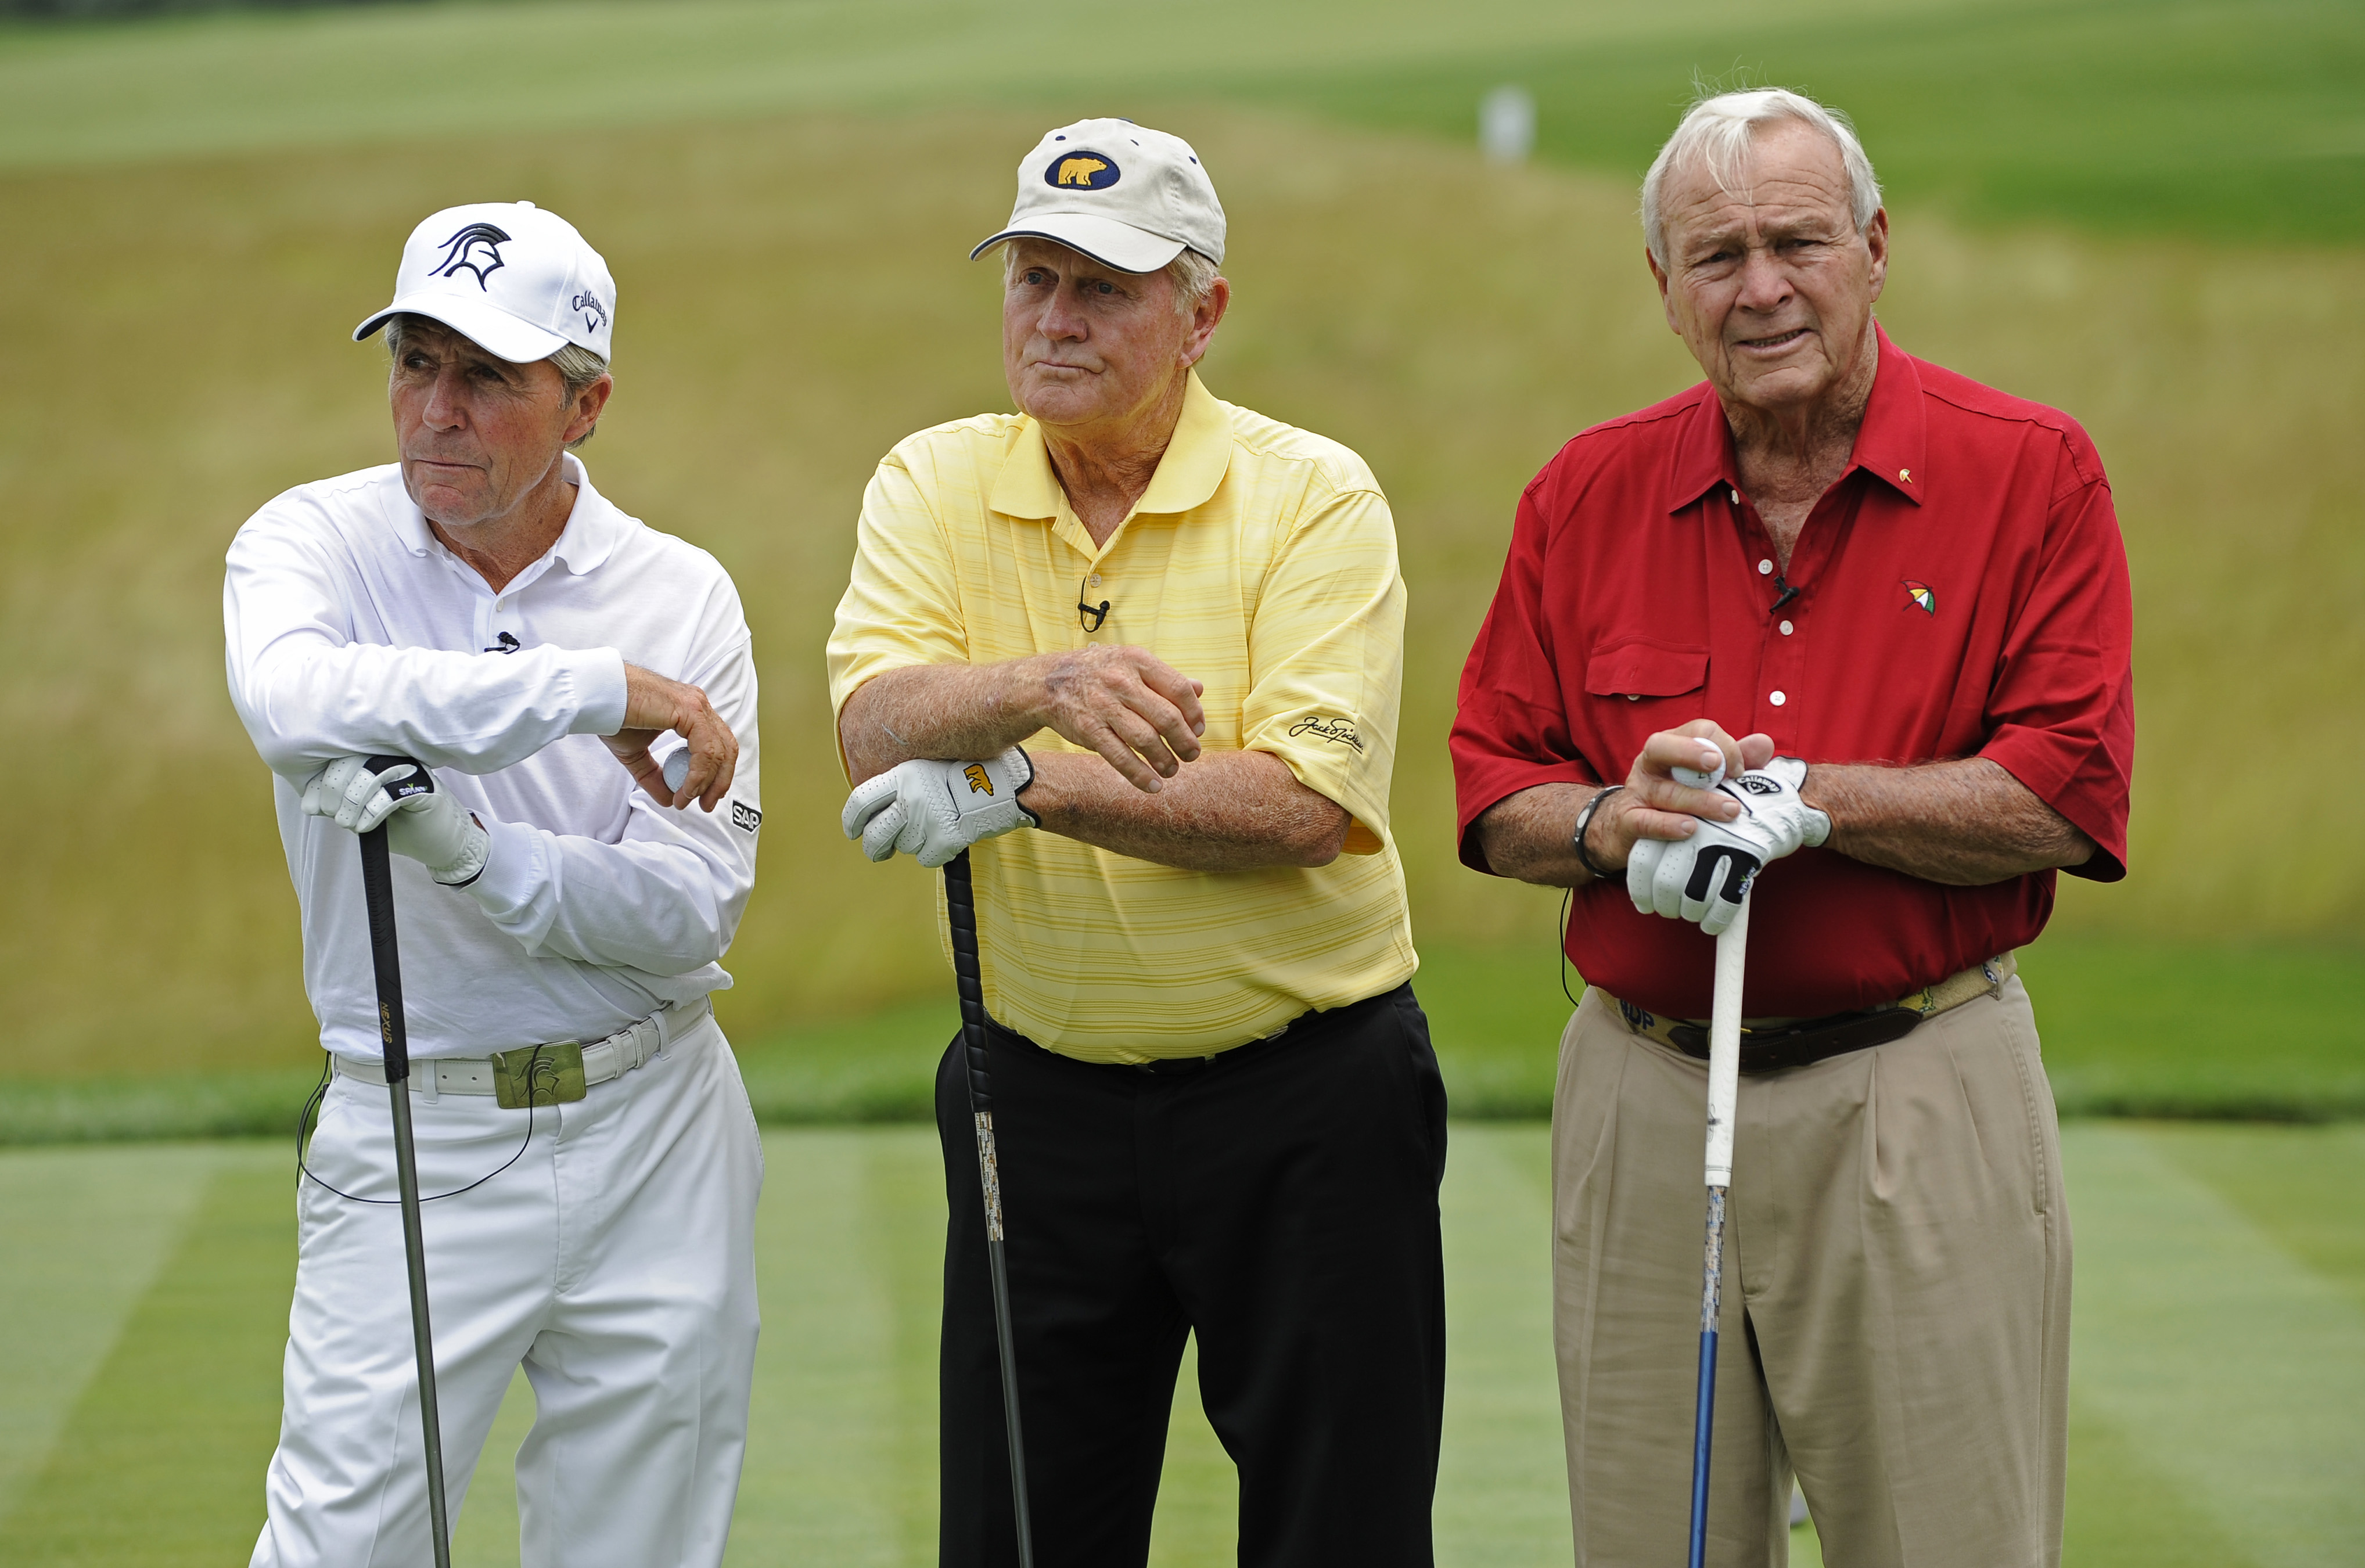 Gary Player of South Africa, Jack Nicklaus and Arnold Palmer at The Big Three fund-raiser for the Mountain Mission Kids at the Olde Farm Golf Club on June 8, 2010 in Bristol, Va.